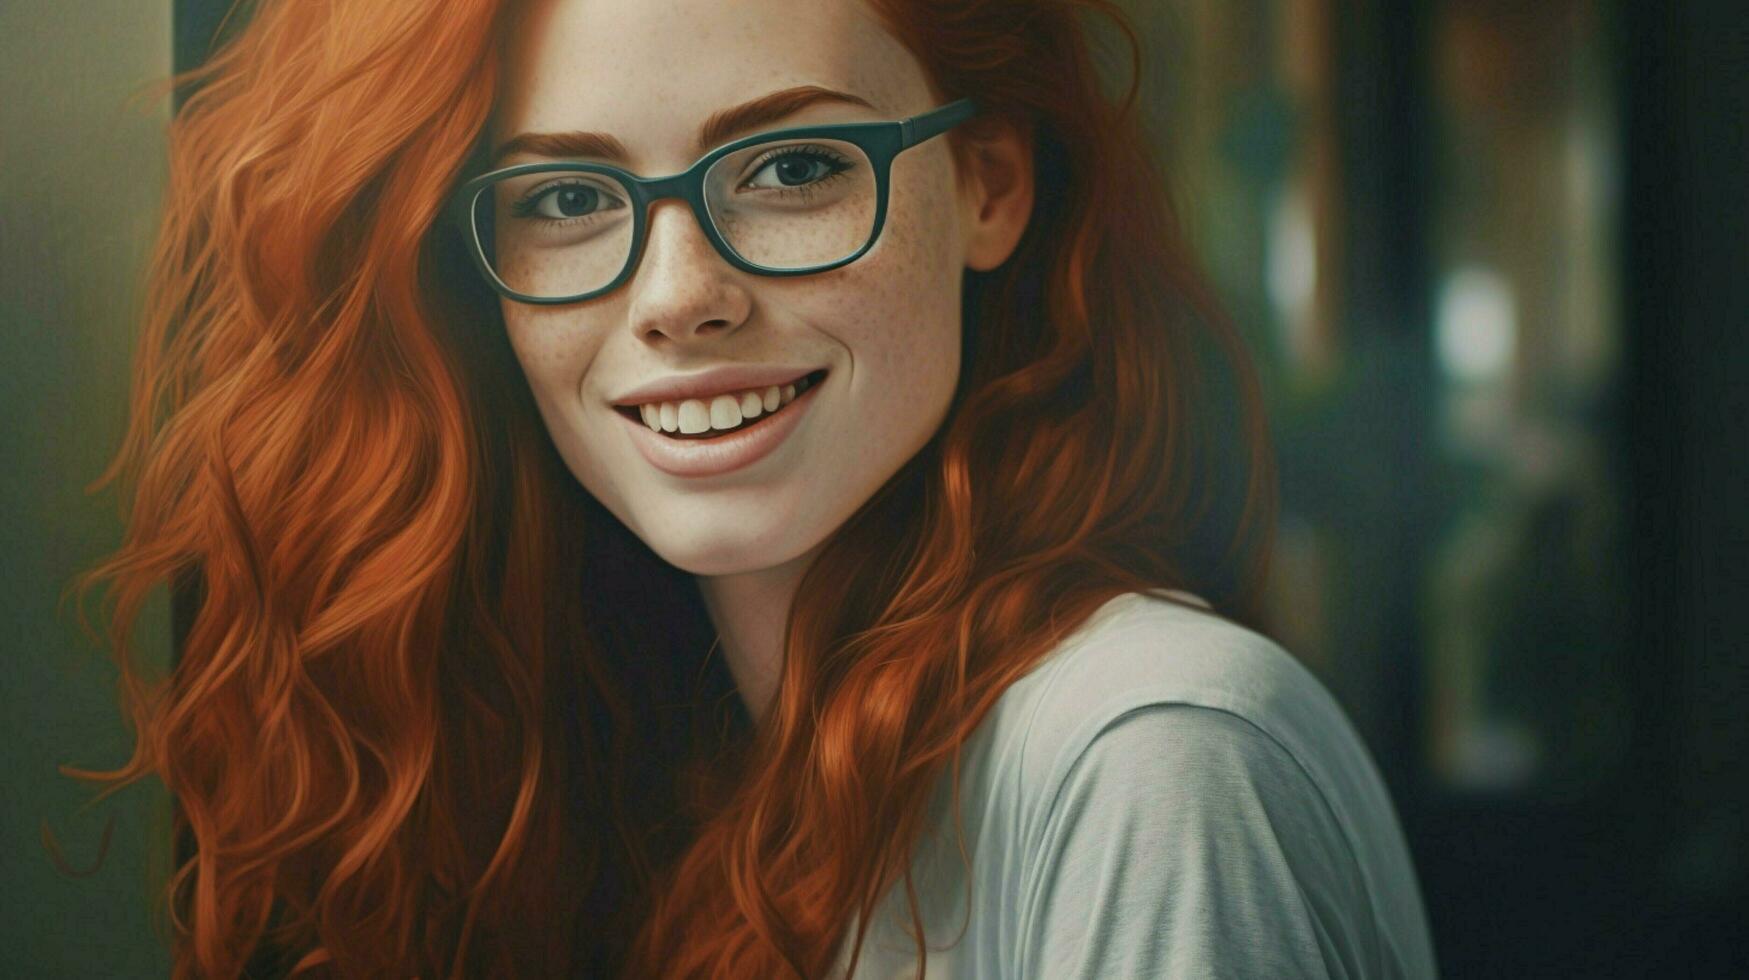 a woman with red hair wearing glasses smiles at t photo